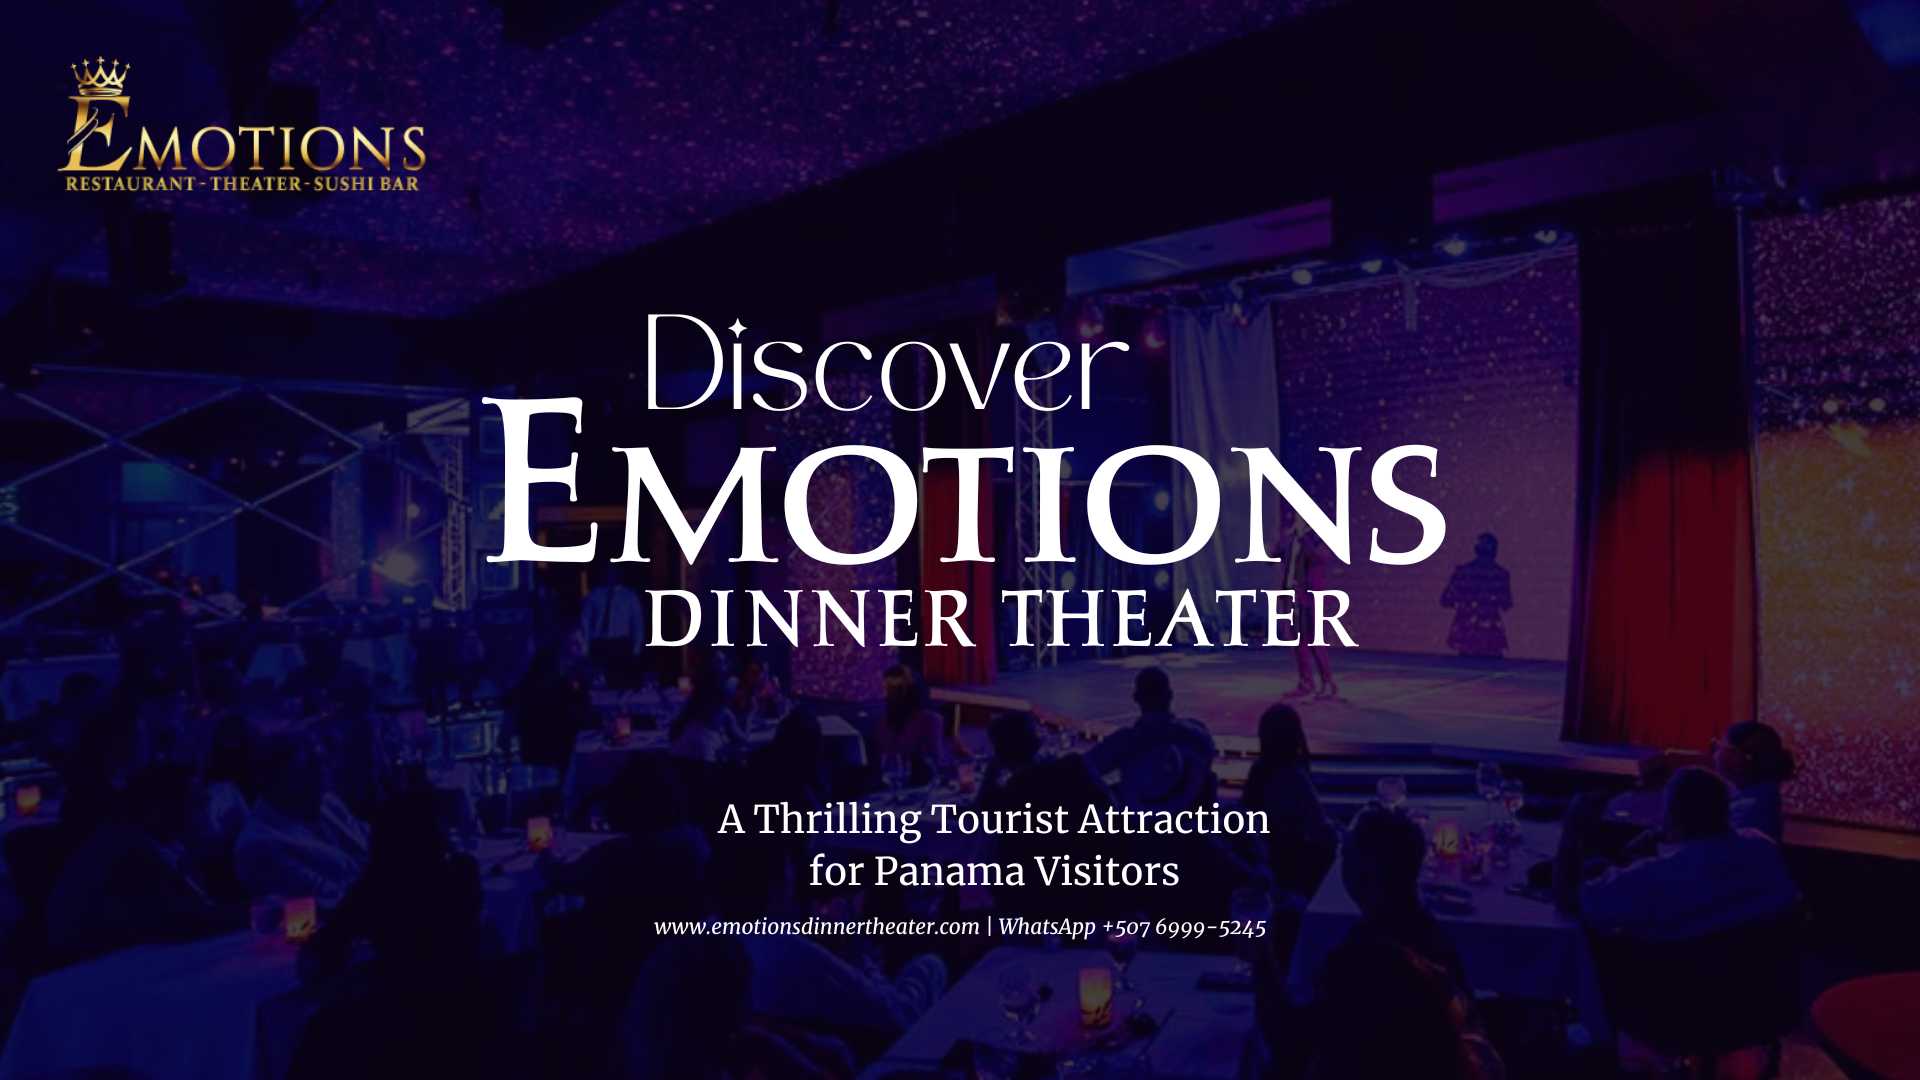 Discover Emotions Dinner Theater, a Thrilling Tourist Attraction for Panama Visitors